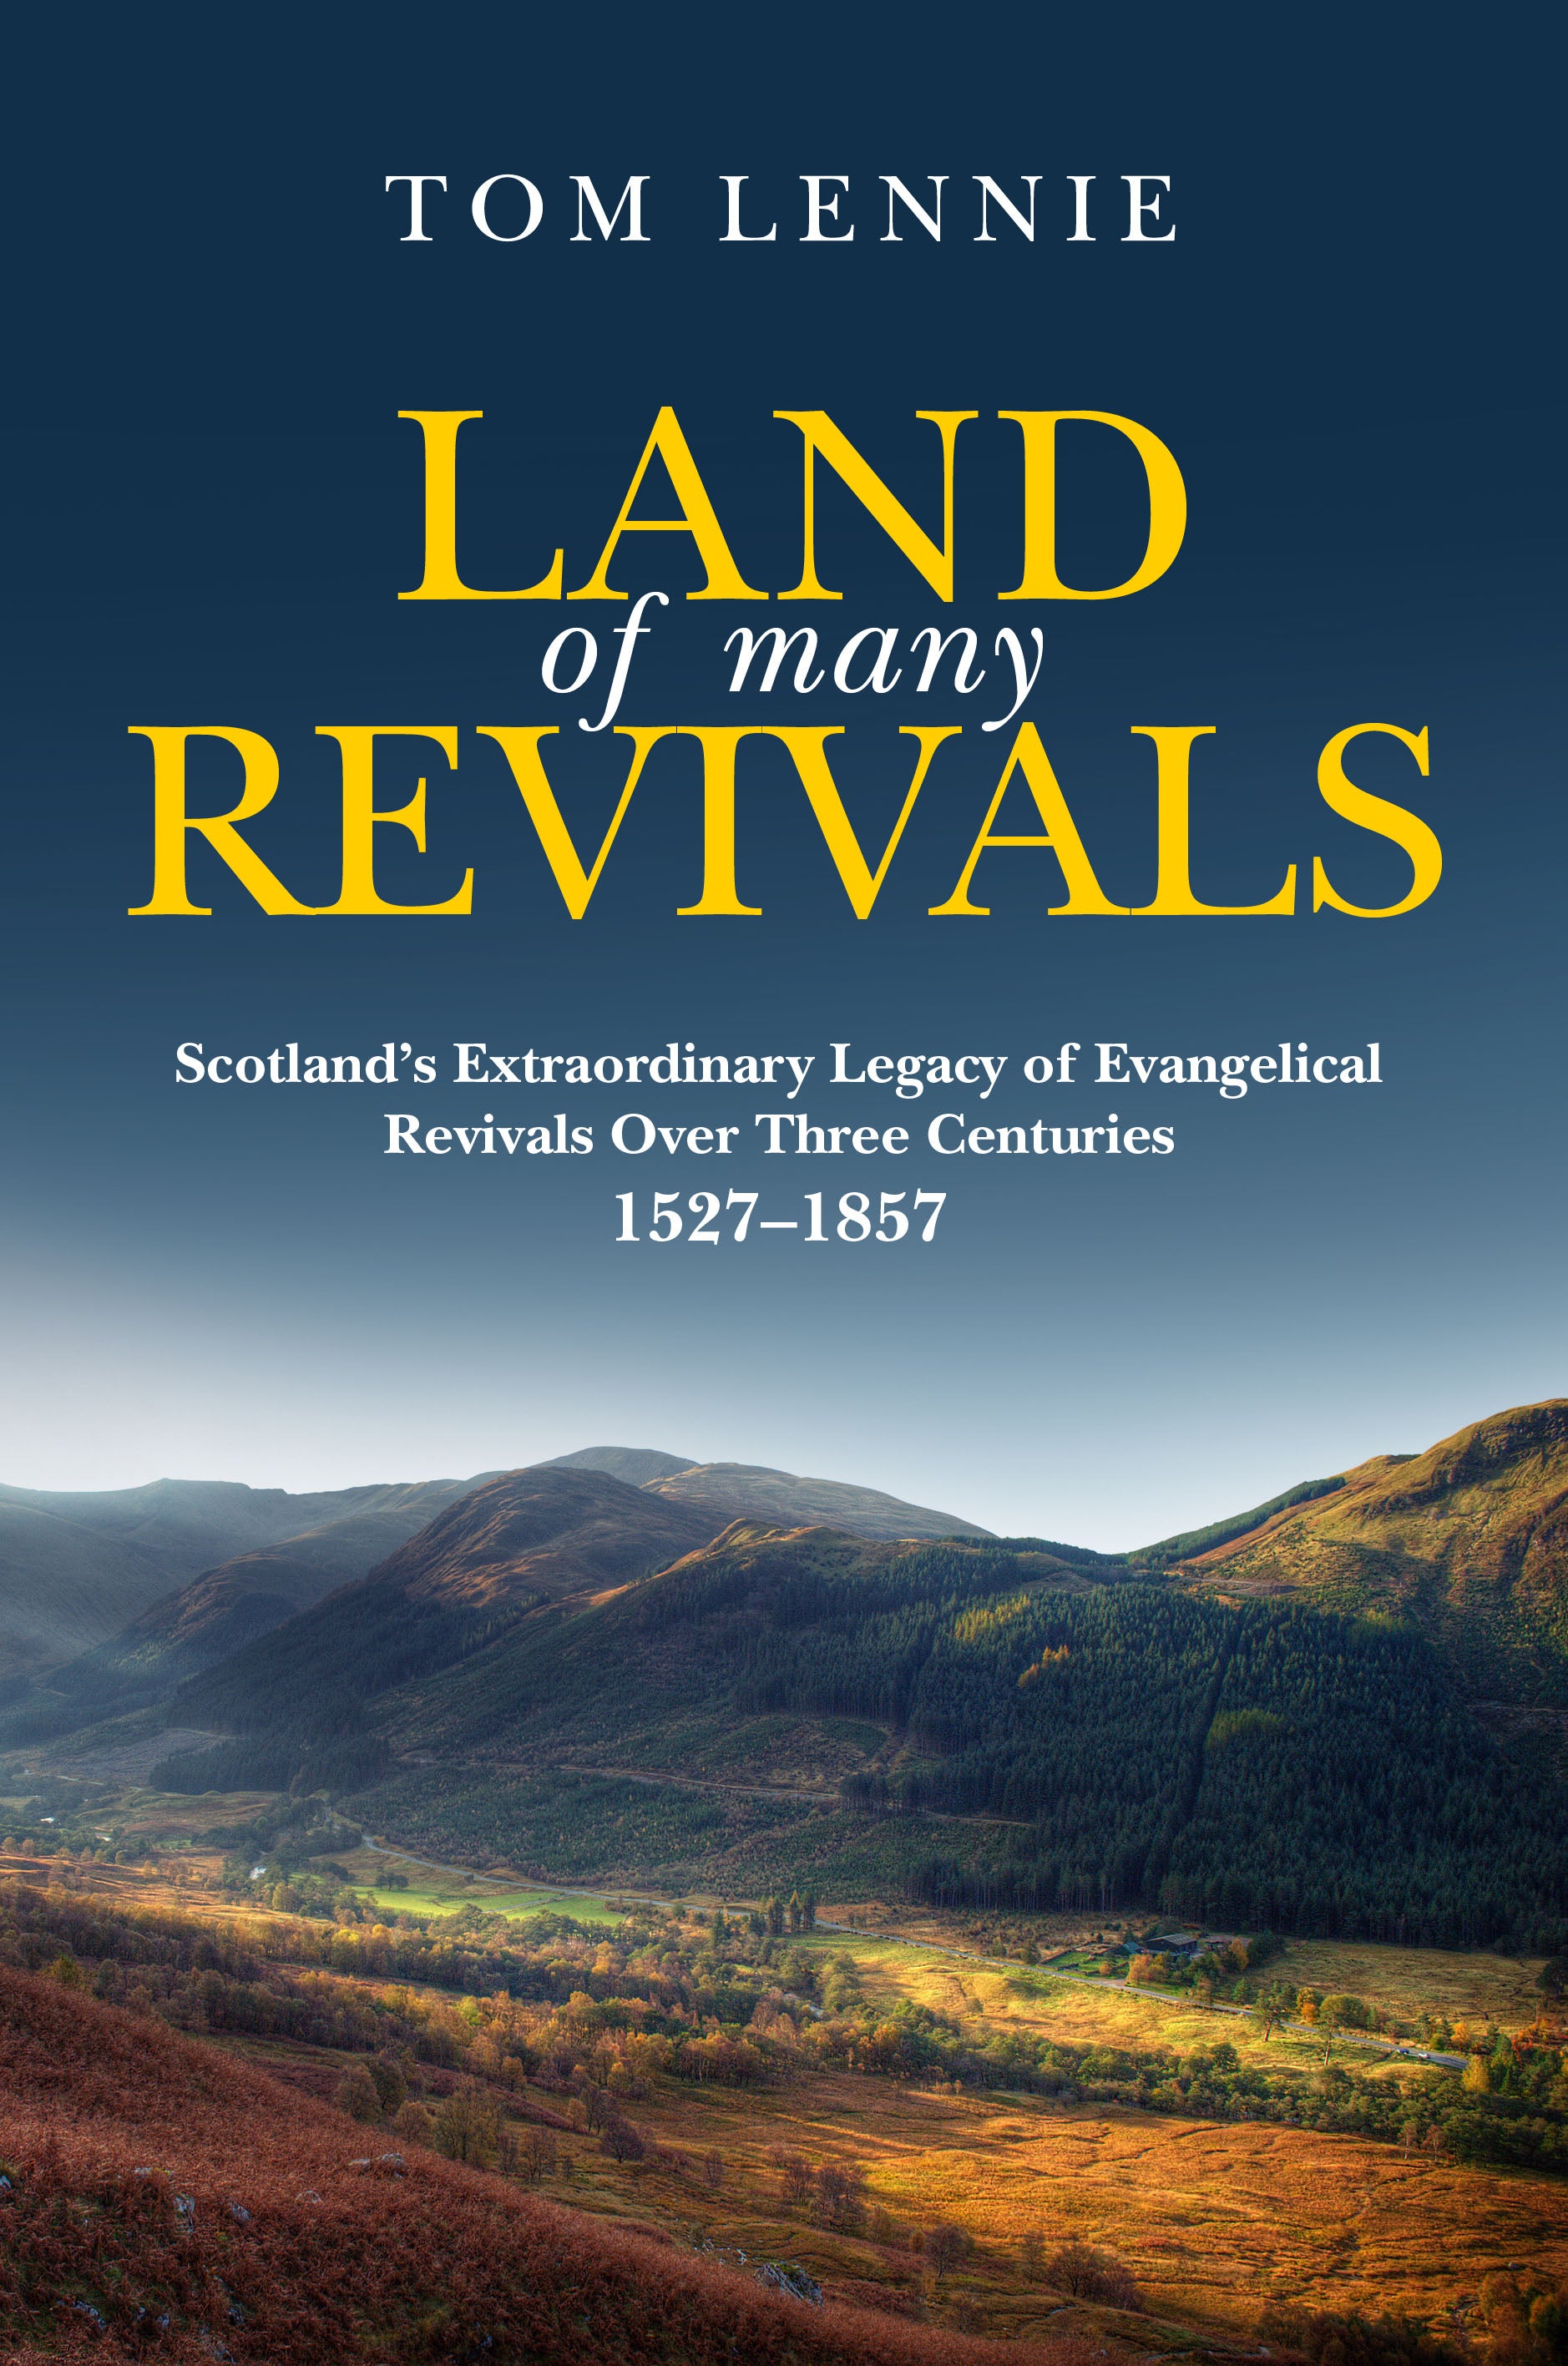 Image of Land of Many Revivals other